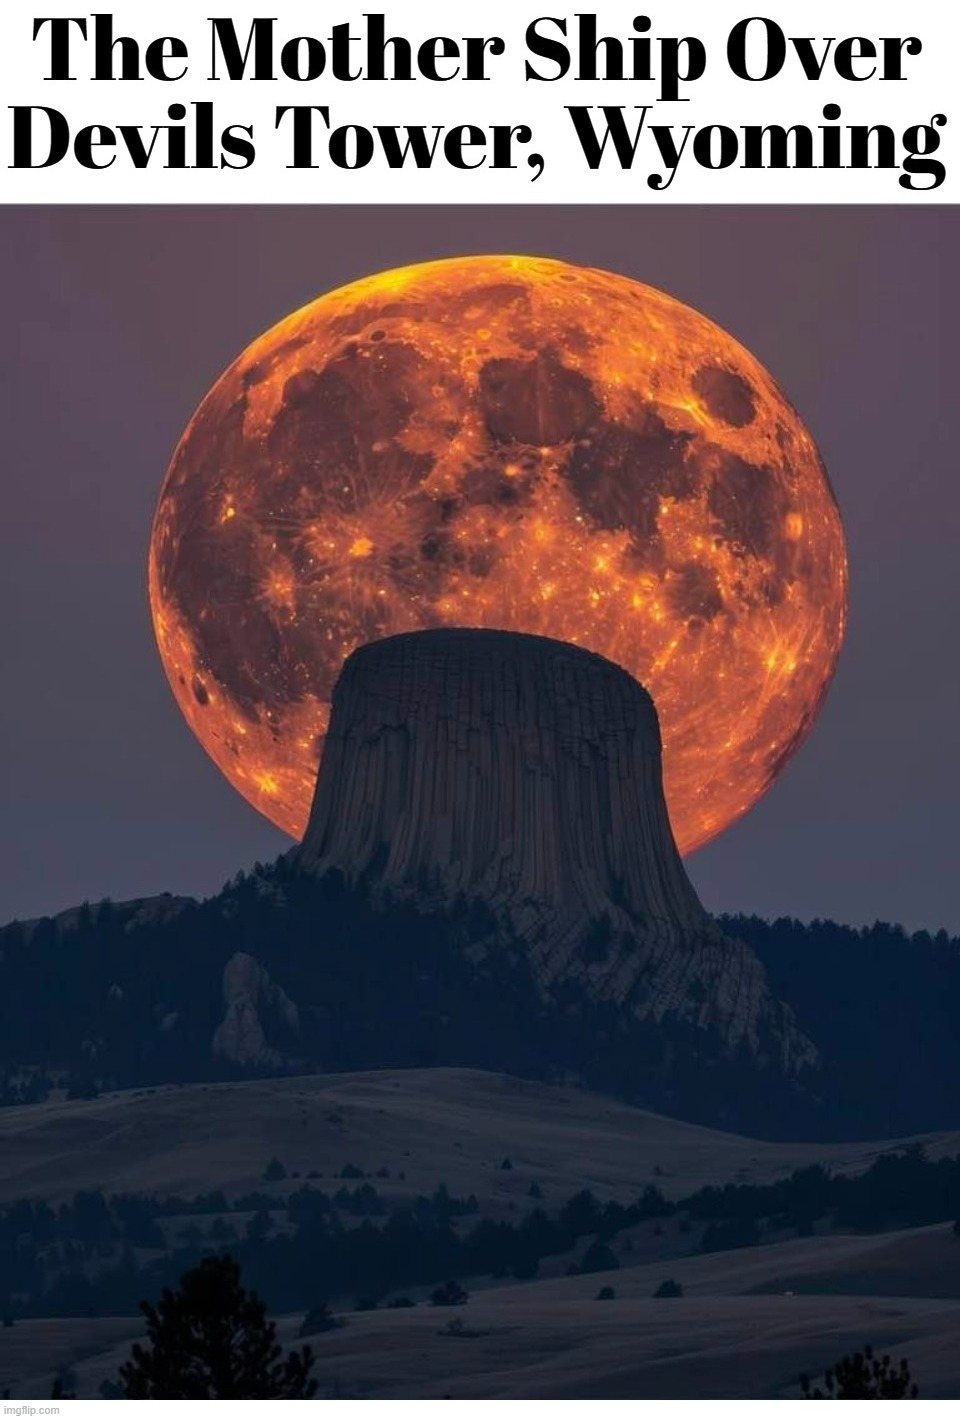 Close Encounters Was Just the Beginning. | image tagged in close encounters of the third kind,devils tower,mother ship,alien week,alien invasion,illegal aliens | made w/ Imgflip meme maker